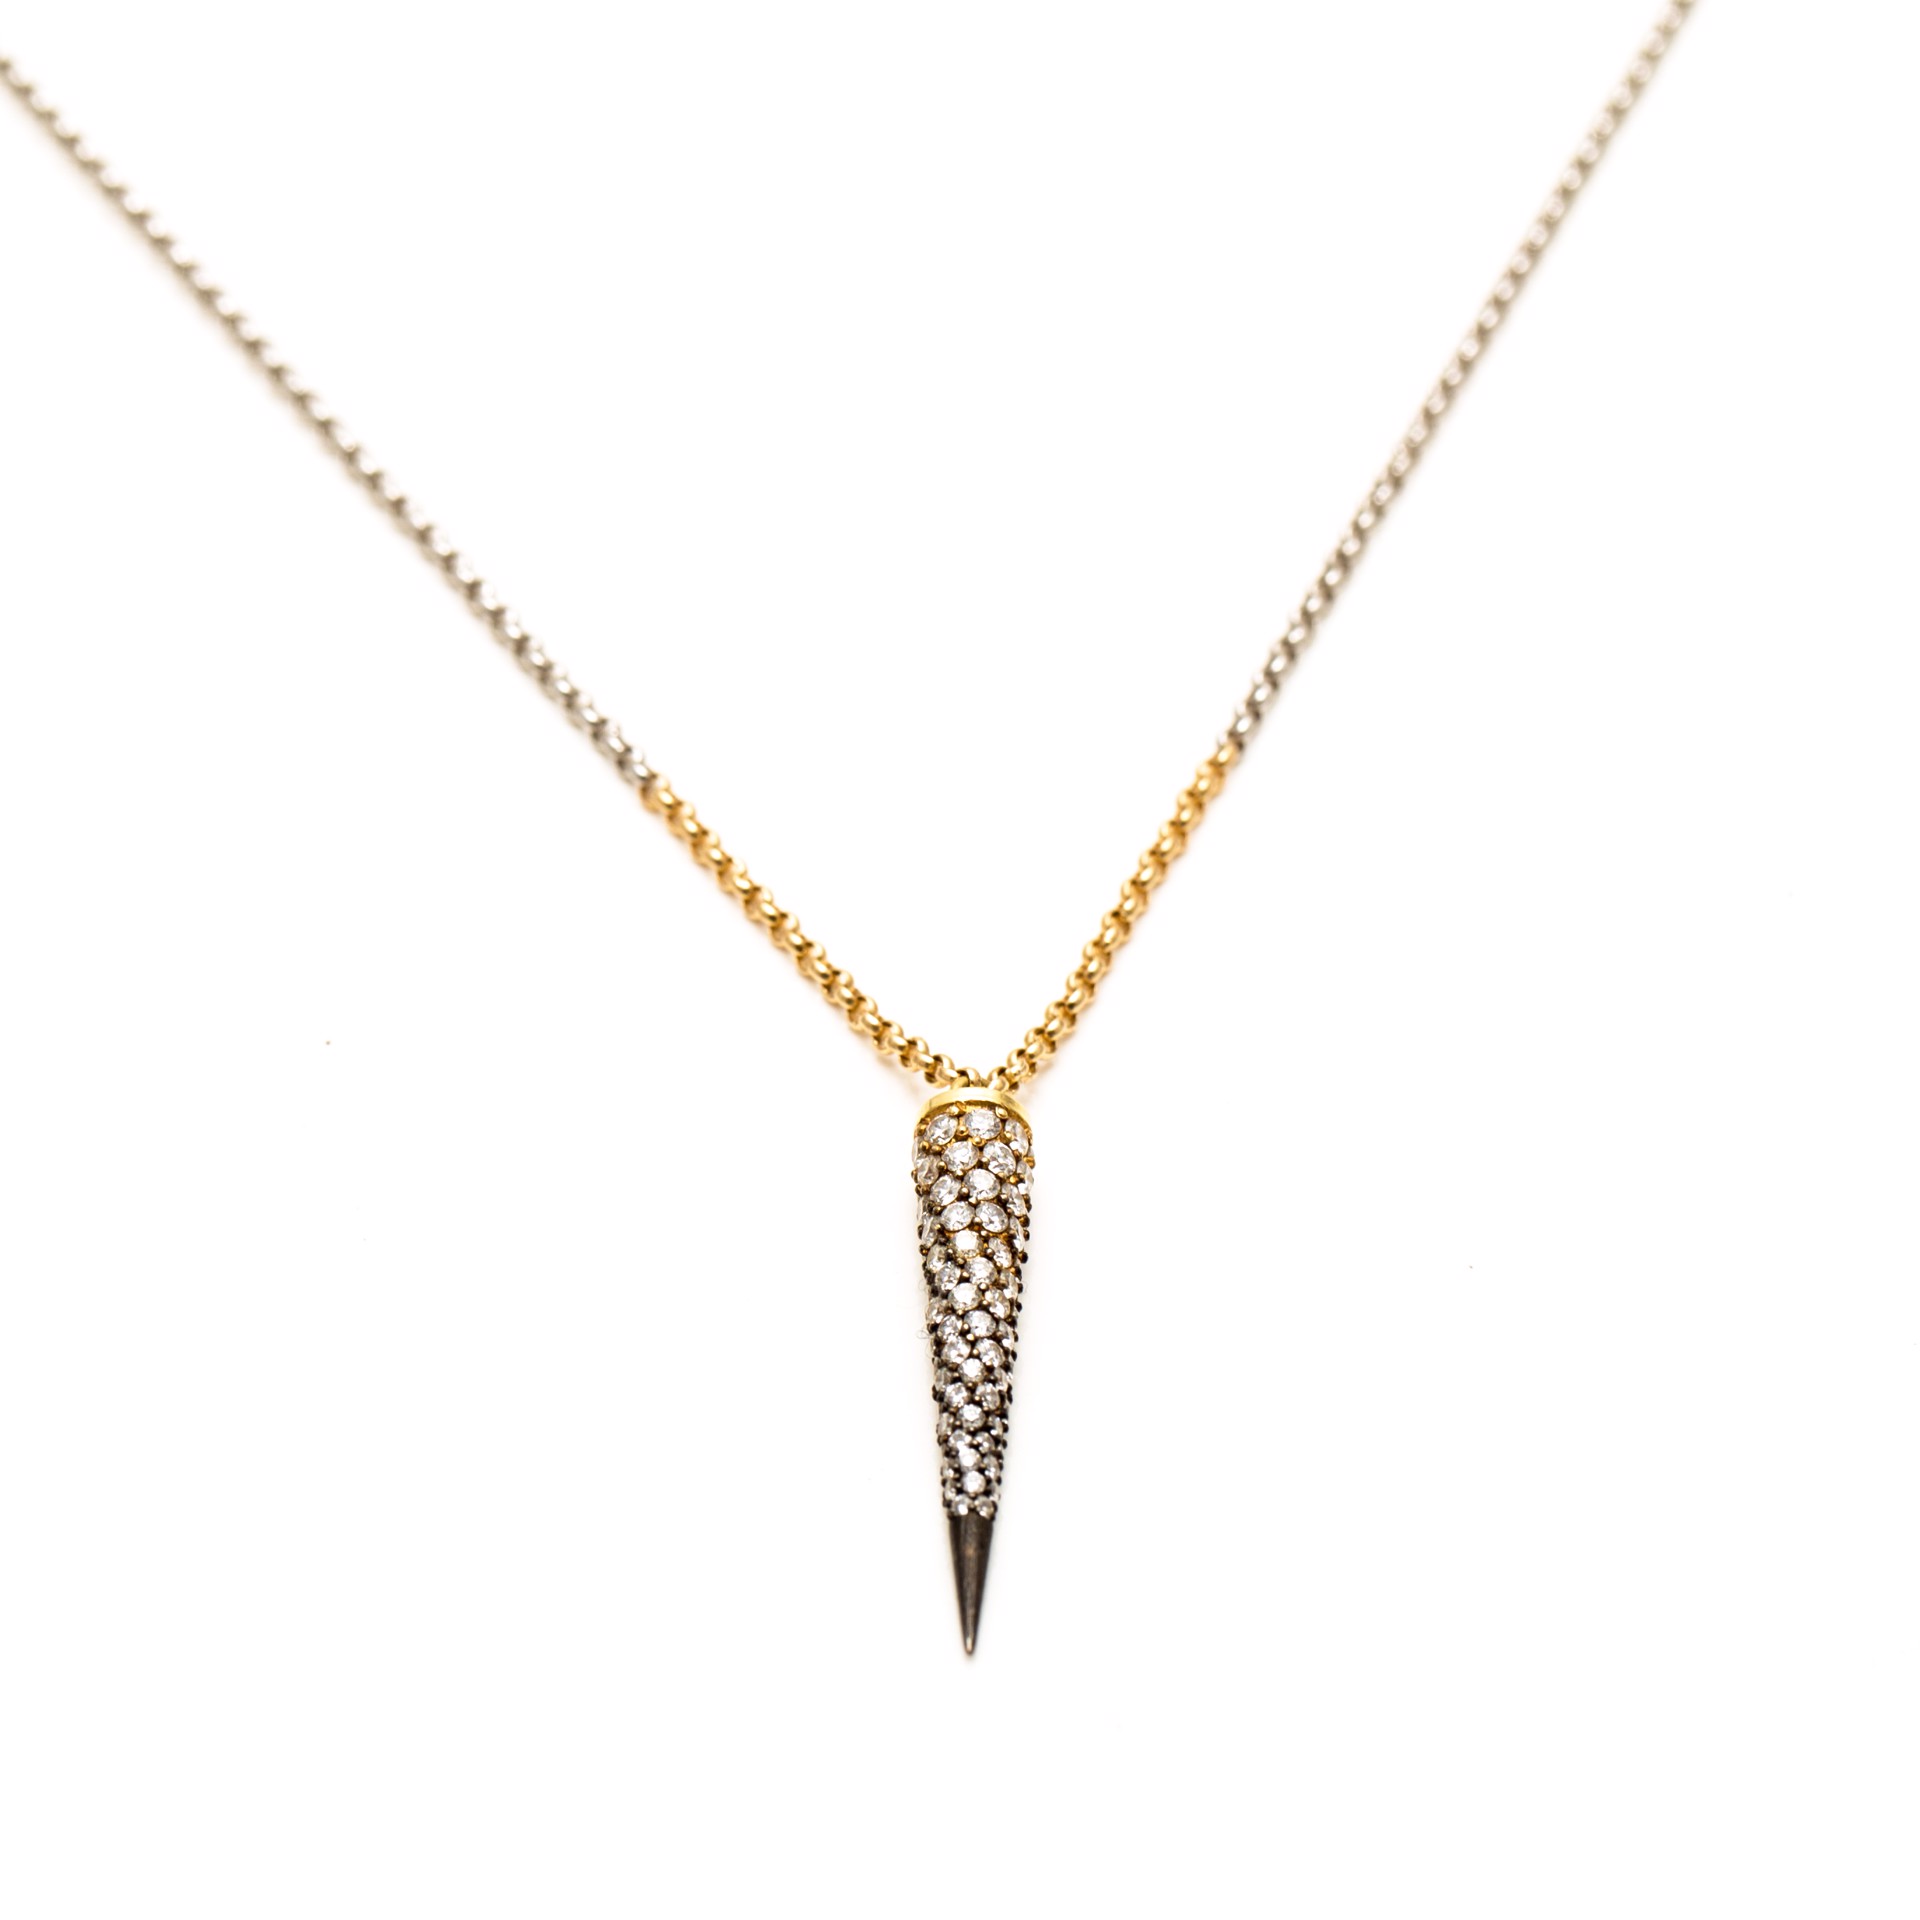 I Am Deadly - Diamond Spike Necklace by Carley Jewels